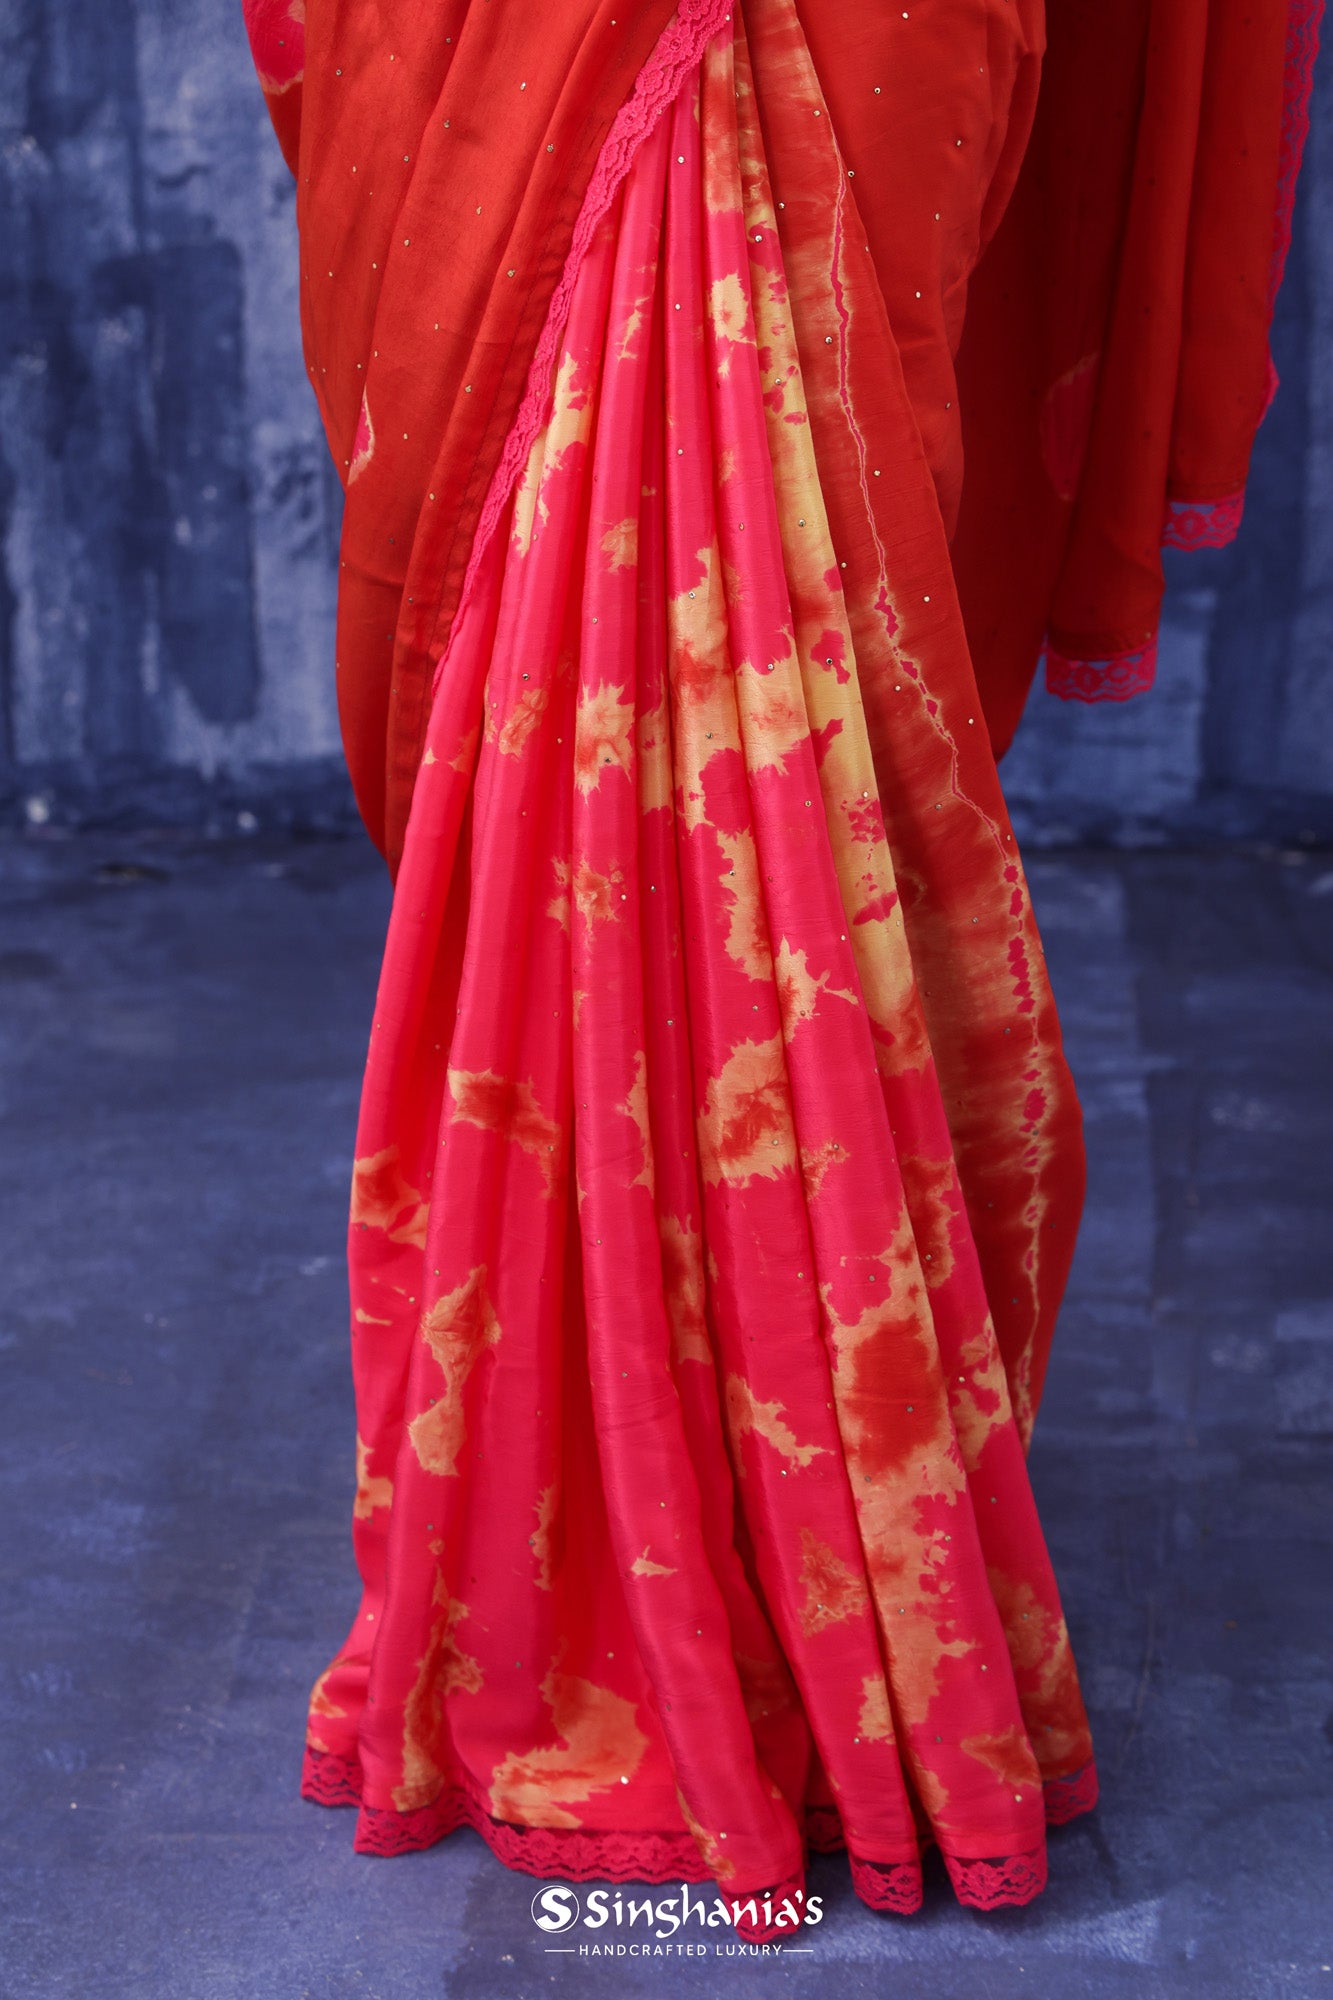 Imperial Red Satin Saree With Tie-Dye Pattern